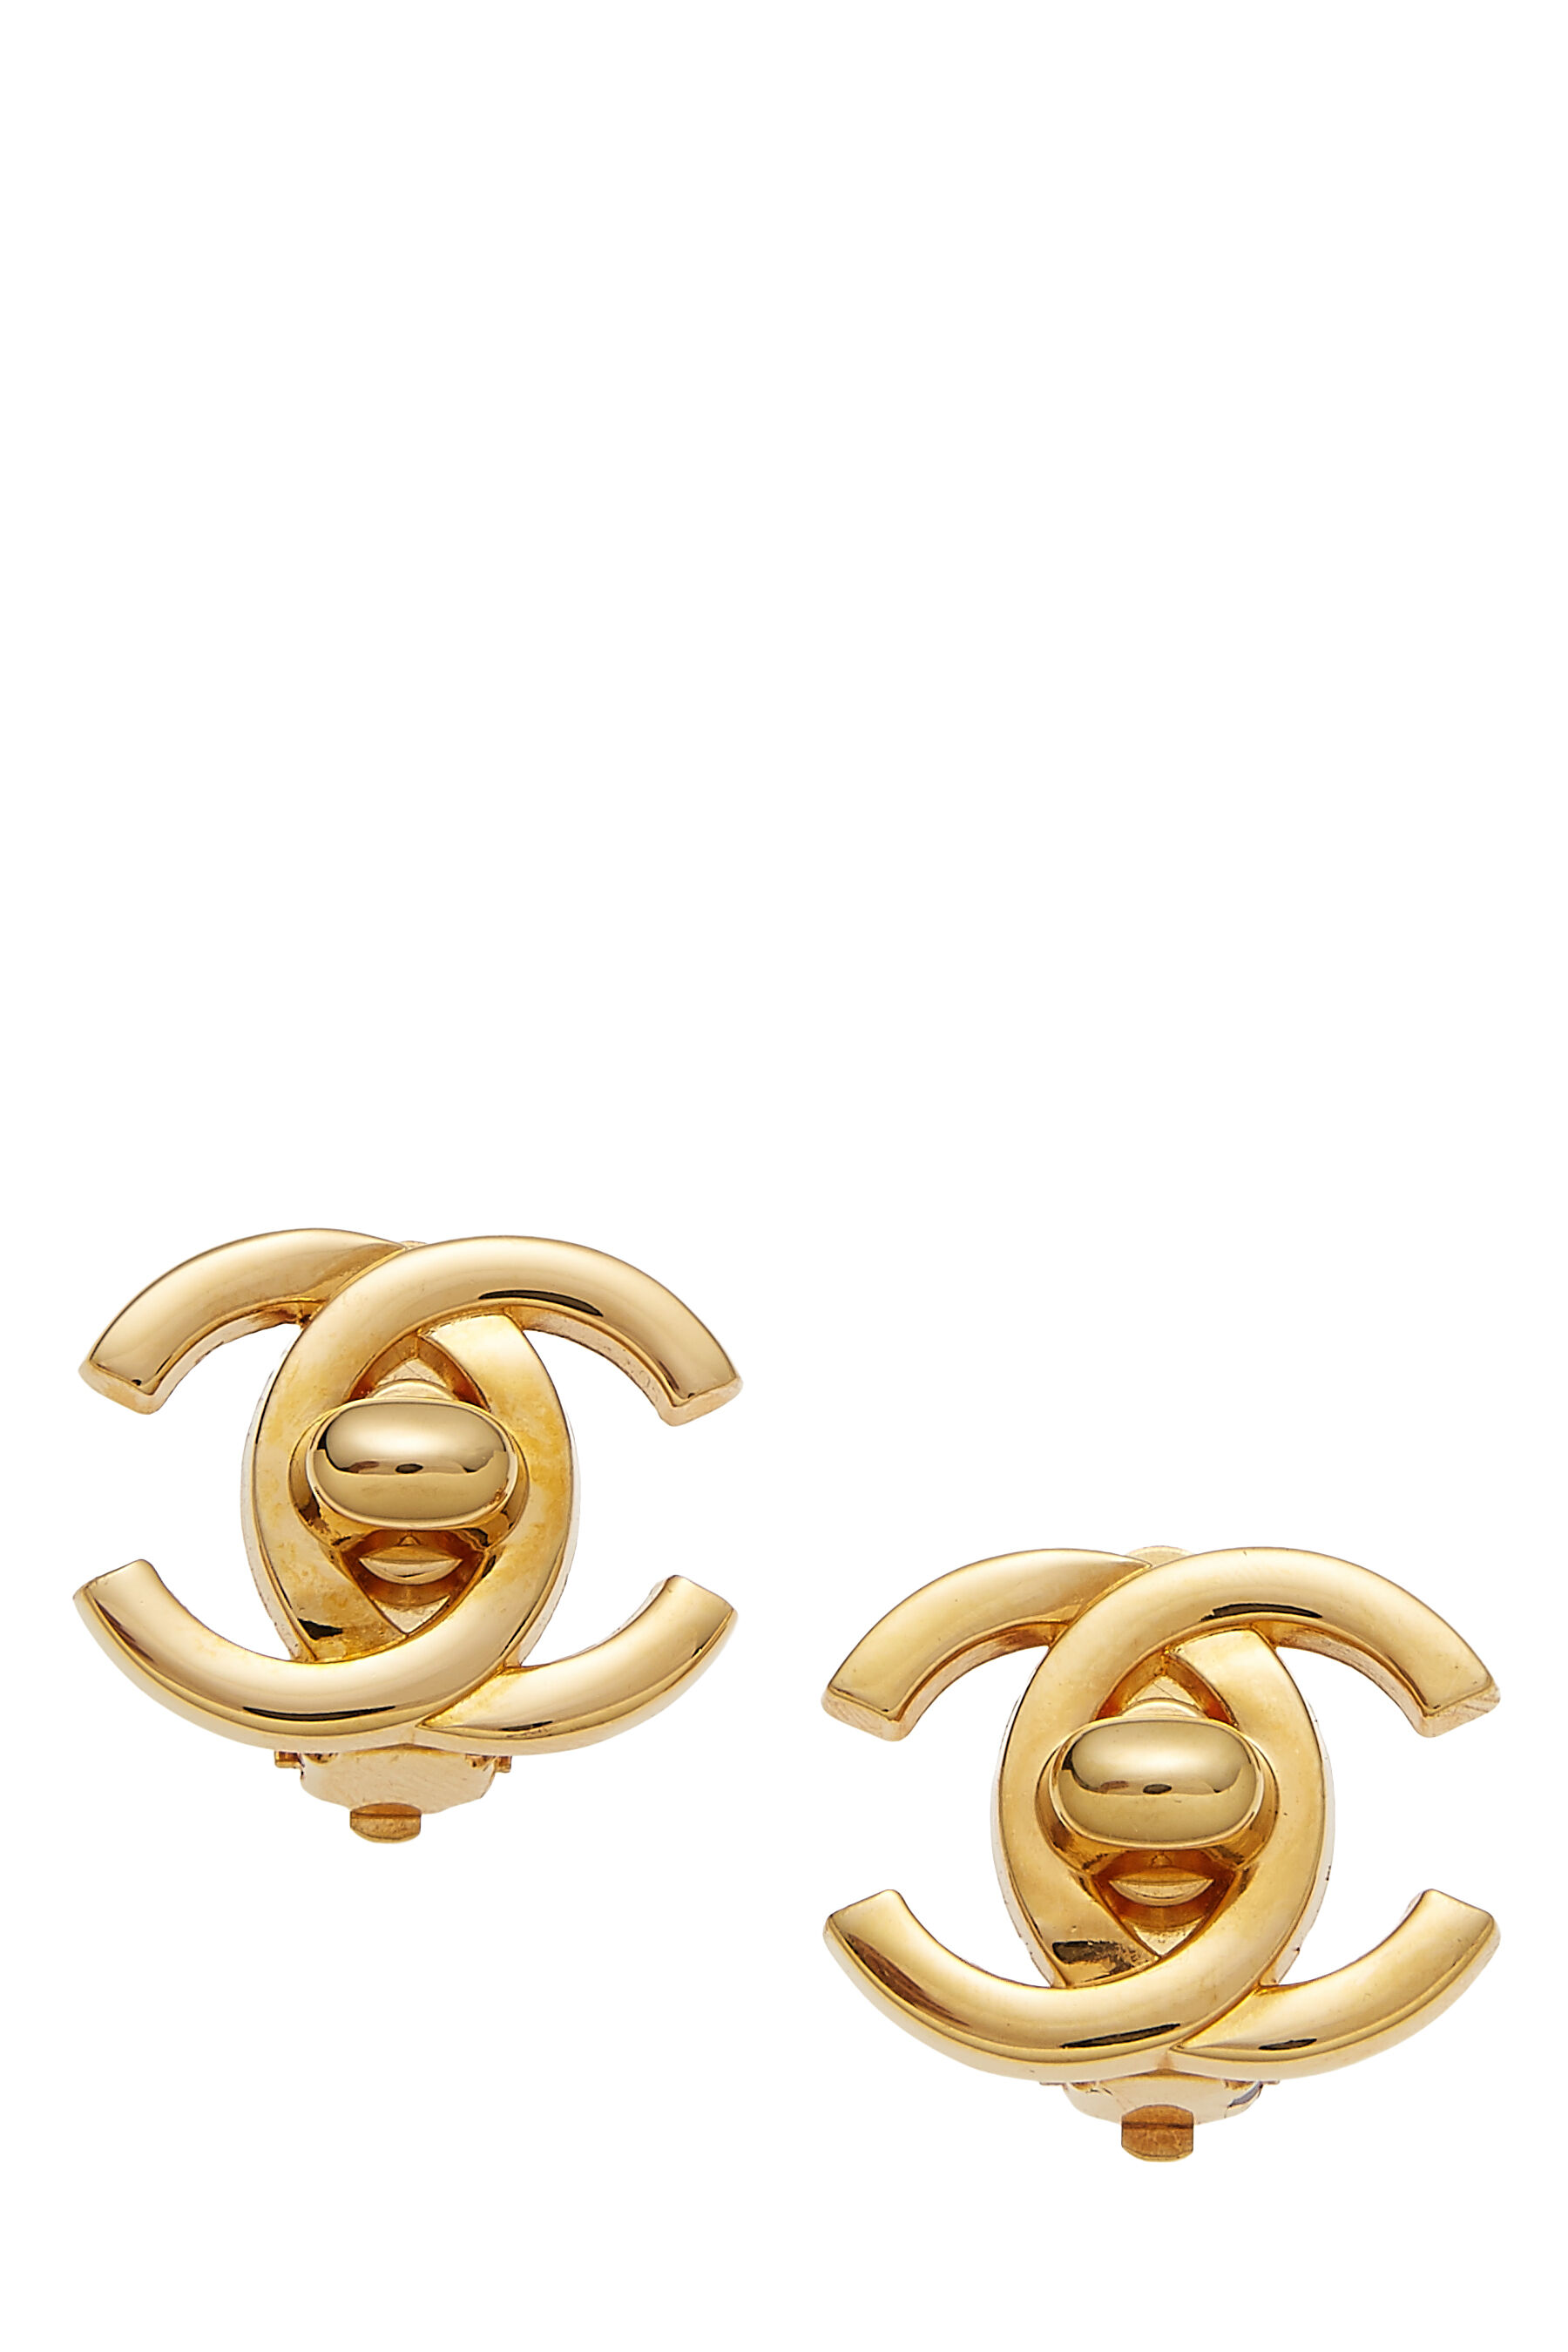 Chanel Gold 'CC' Turnlock Earrings Large Q6J0LE17D5166